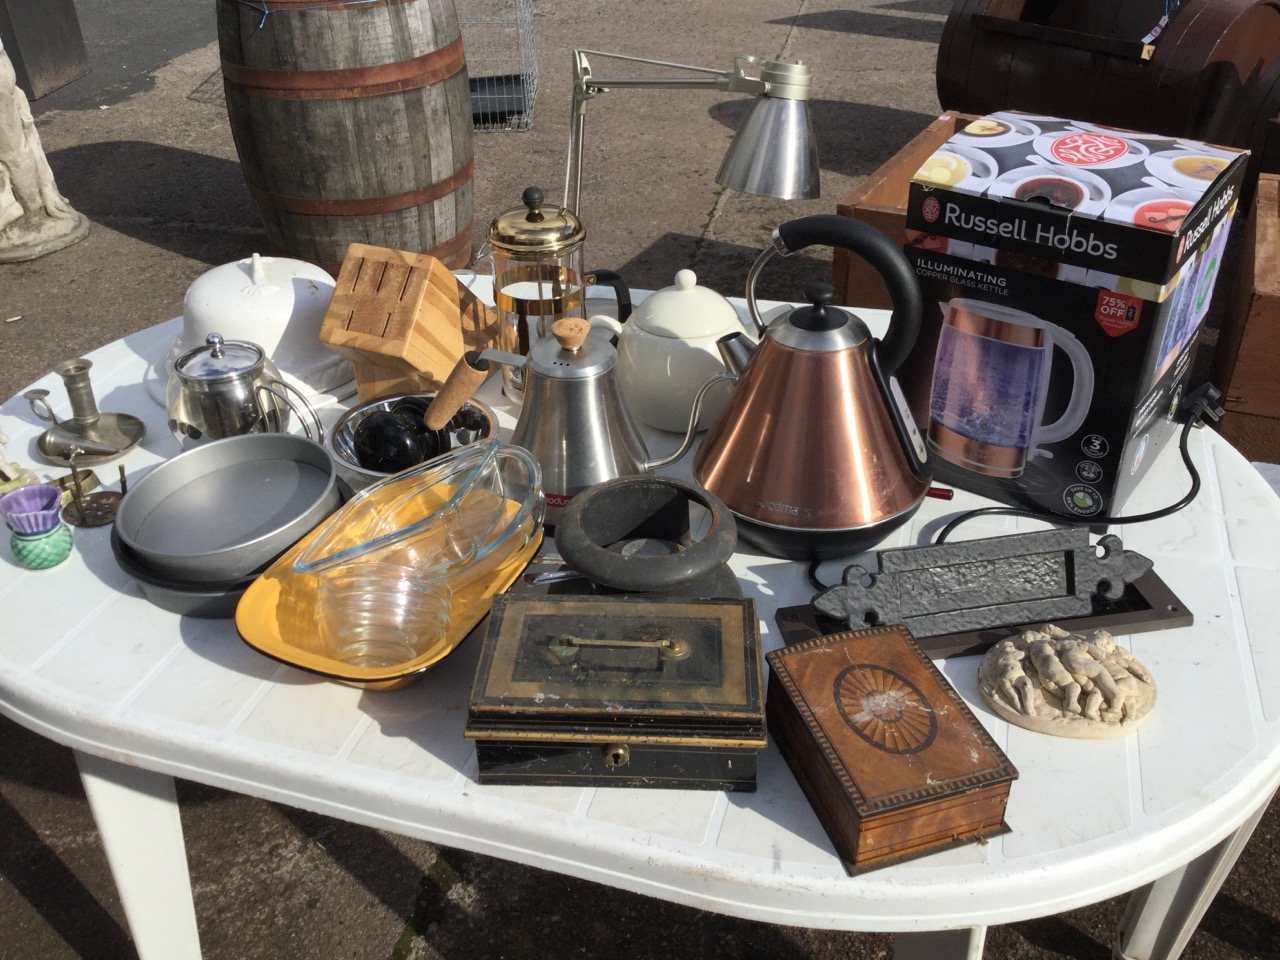 Miscellaneous items including old tins, a ceramic front door knob, a Goodmans copper electric